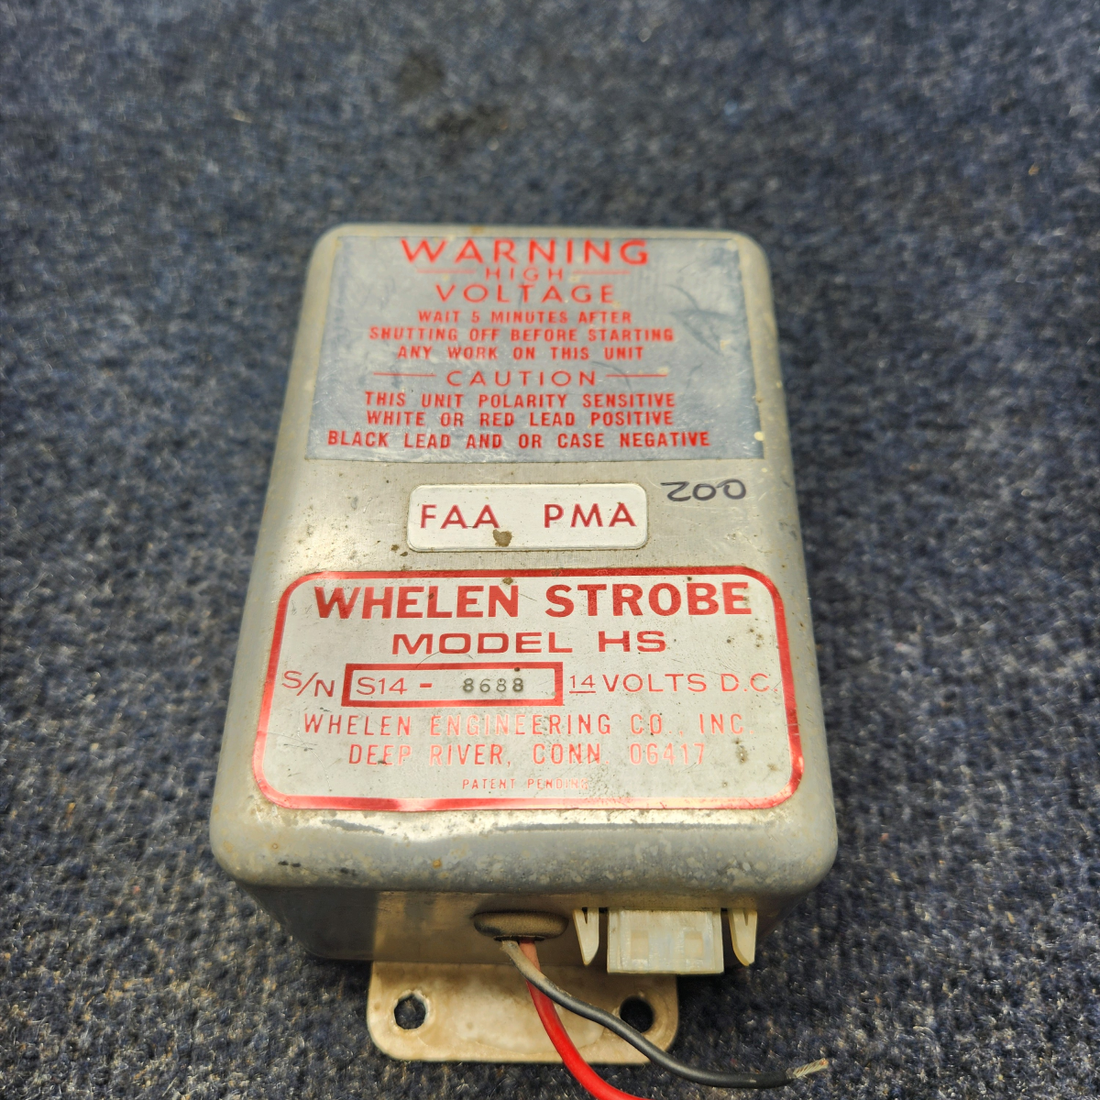 Used aircraft parts for sale, A412A HS-DF-14 Whelen Strobe Power Supply WHELEN STROBE LIGHT POWER SUPPLY 14 VOLTS